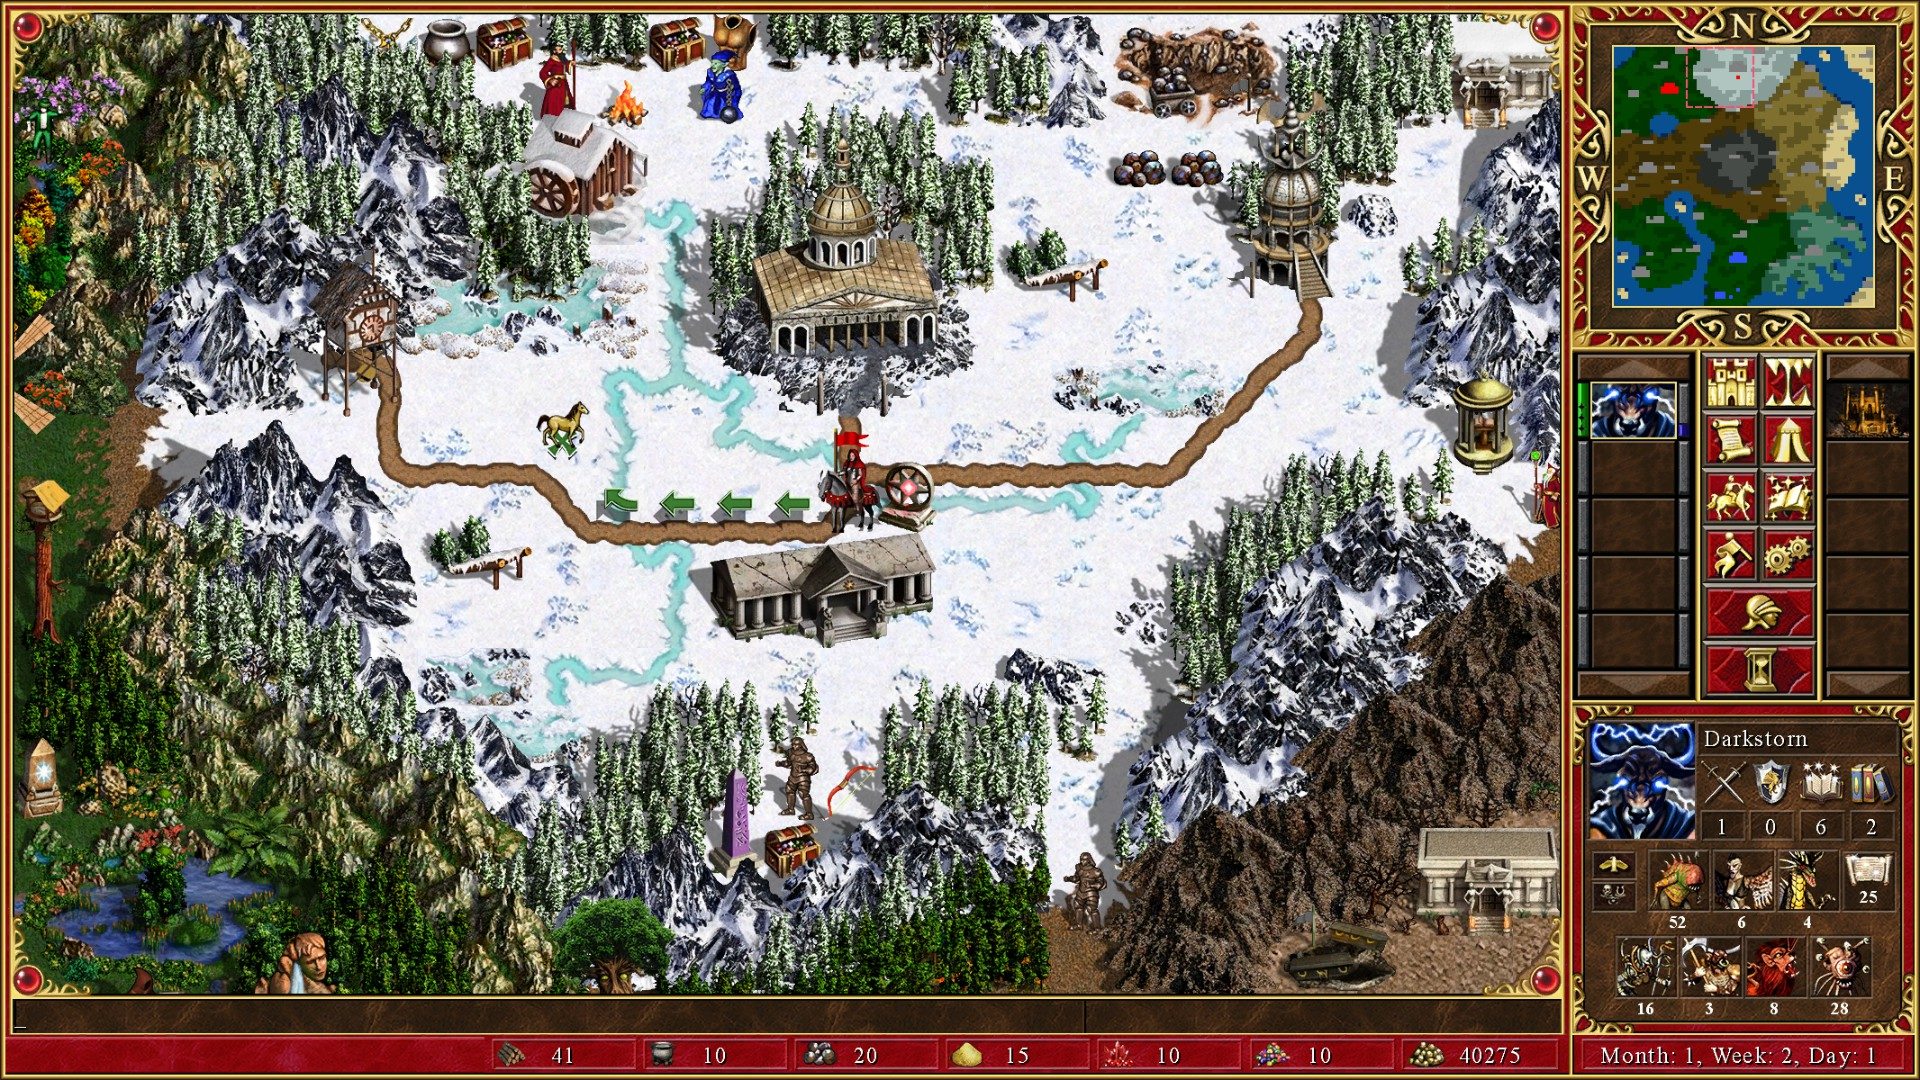 heroes of might and magic 3 hd cheats android